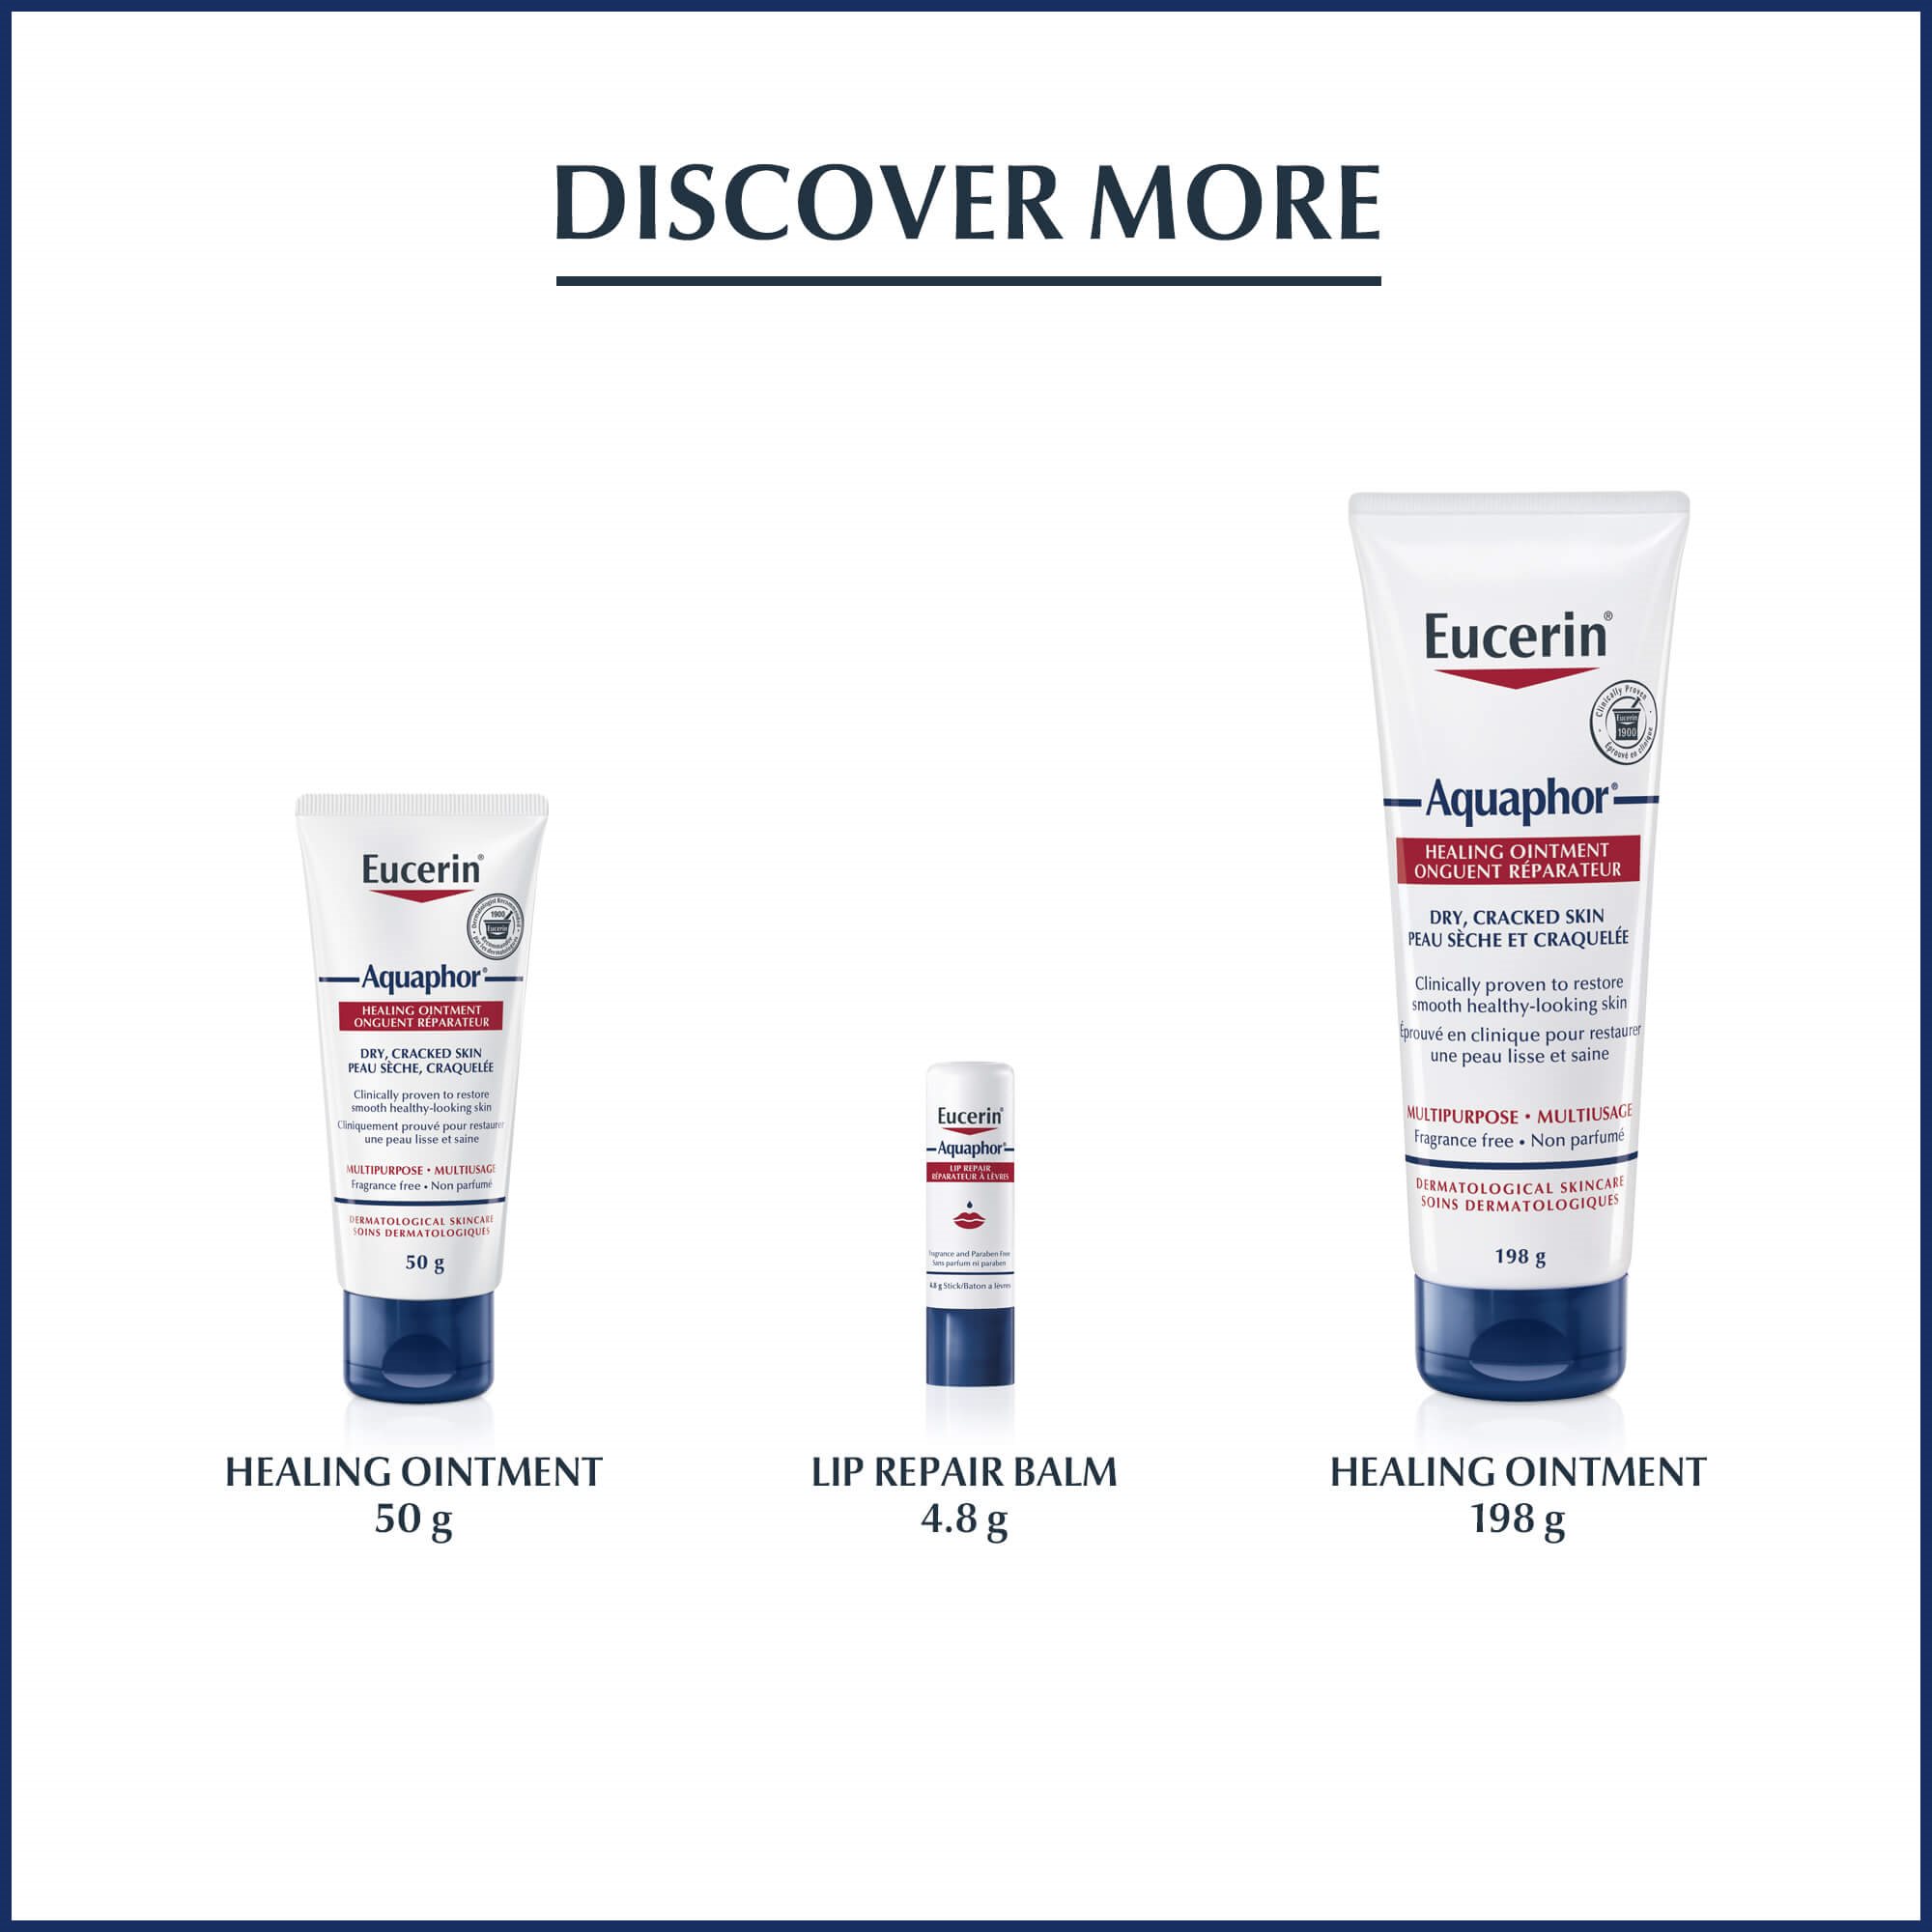 Eucerin Aquaphor product range, including 4.8g lip repair balm, 198g healing ointment tube, and 396g healing ointment tub